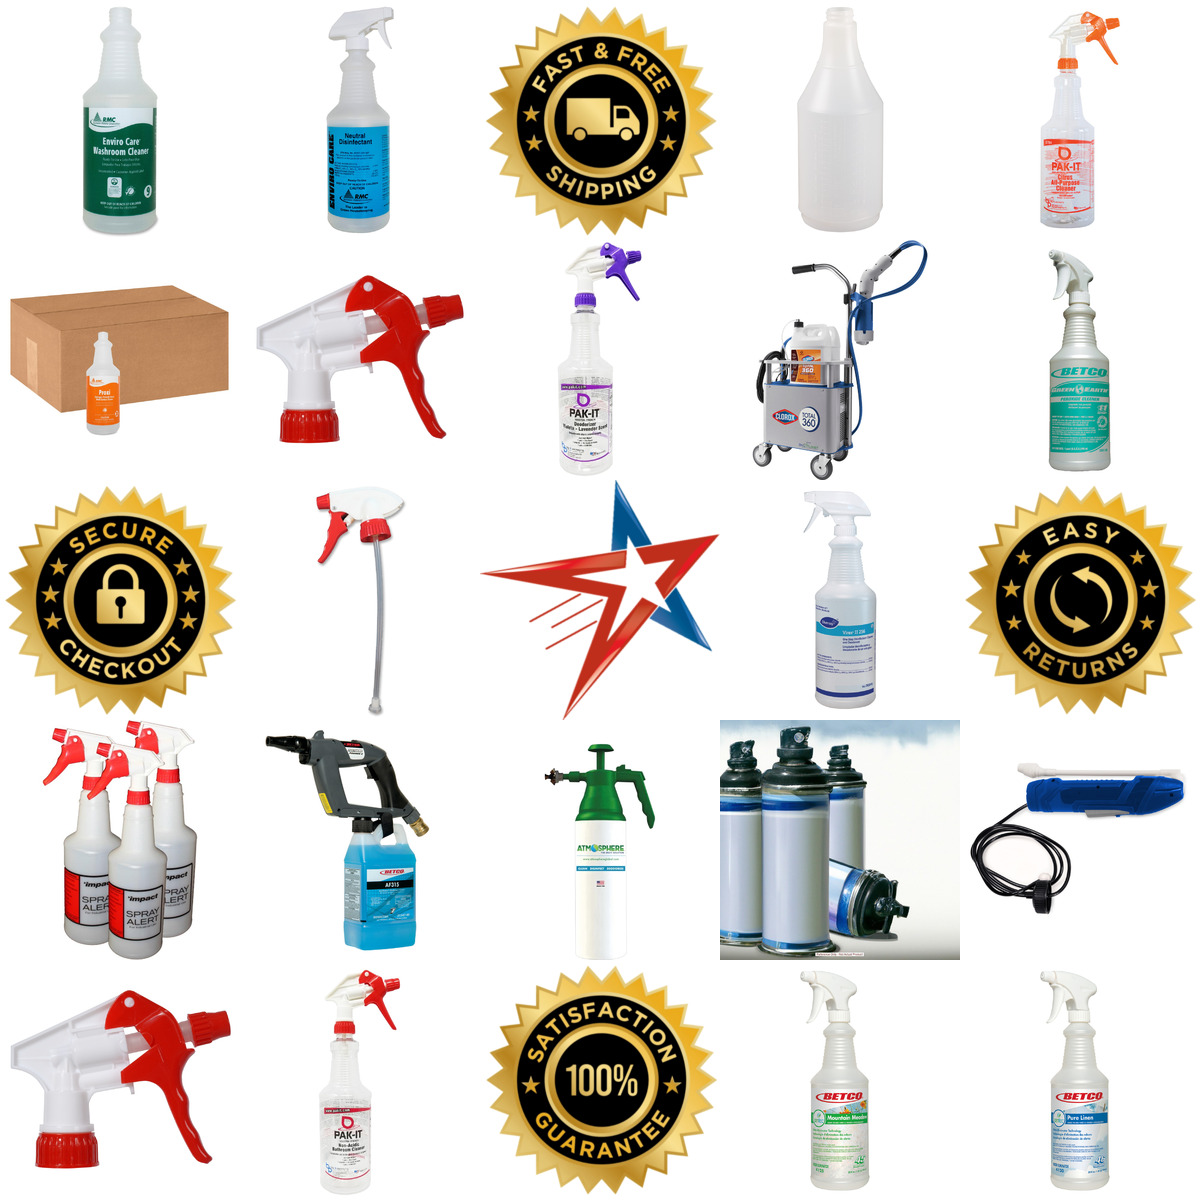 A selection of Spray Bottles products on GoVets